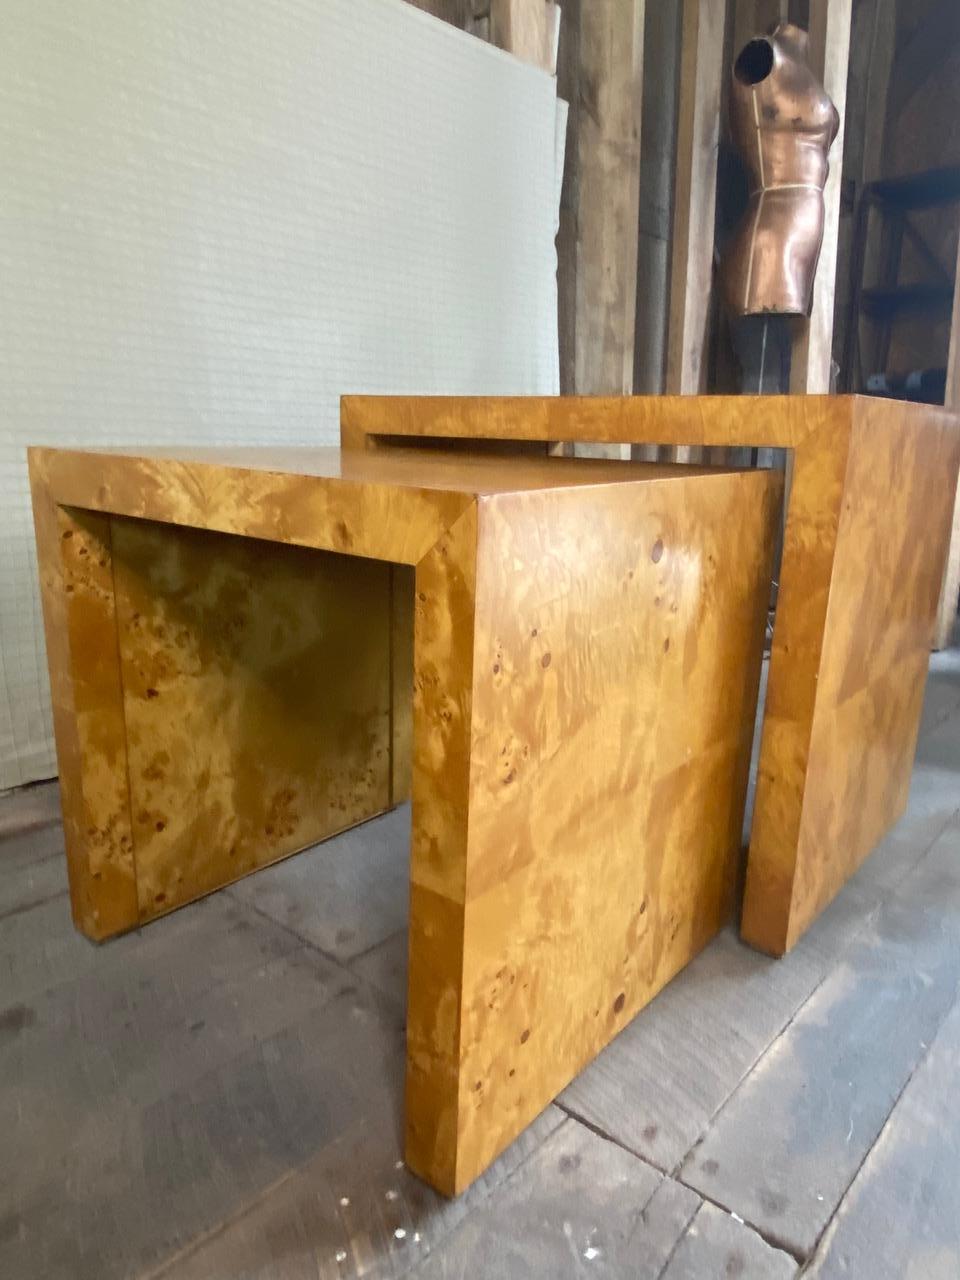 Set of classic mid century modern burl wood waterfall nesting tables by Hekman for their Wind Row collection, circa 1977. 
 Bourbon colored burl wood veneer with recessed interior side panels. 
 Large table 28” W X 24” H X 20” D
 Small table 22.5” W